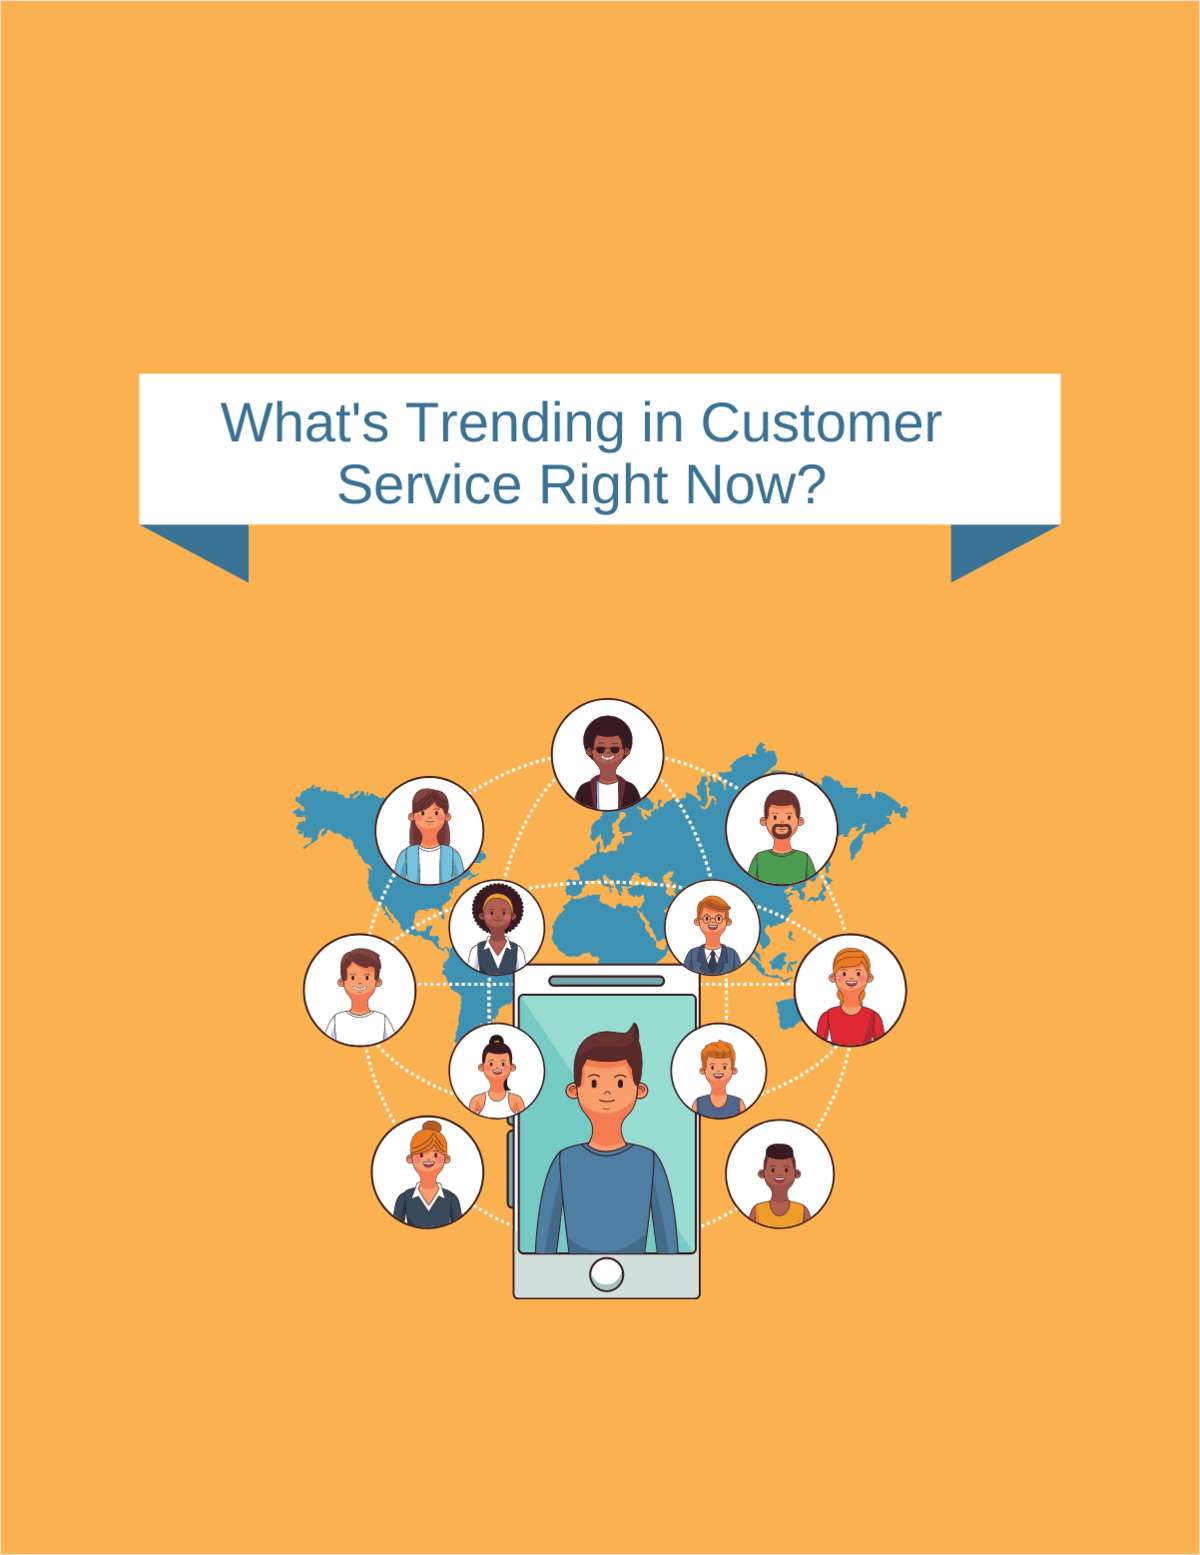 What's Trending in Customer Service Right Now?